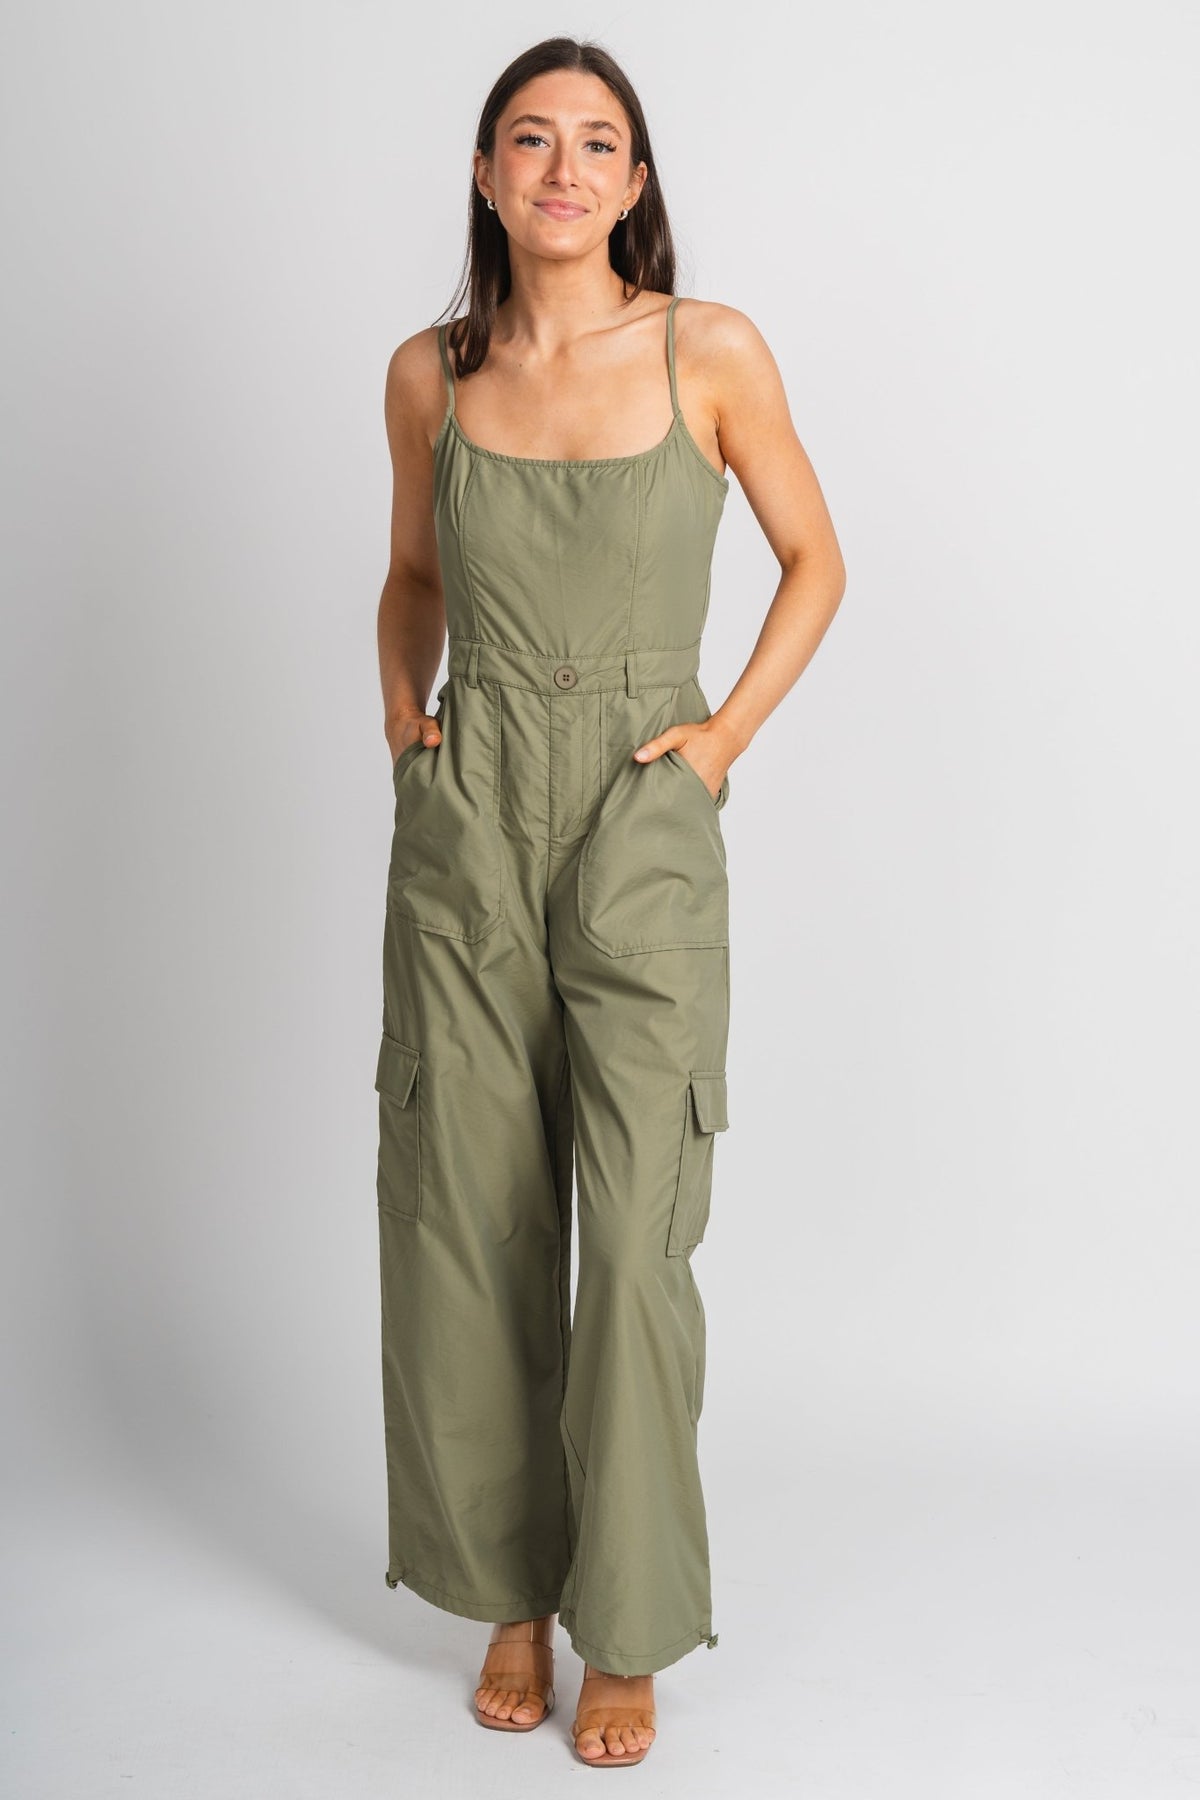  Lucky Brand Women's Tie Front Utility Jumpsuit, Four